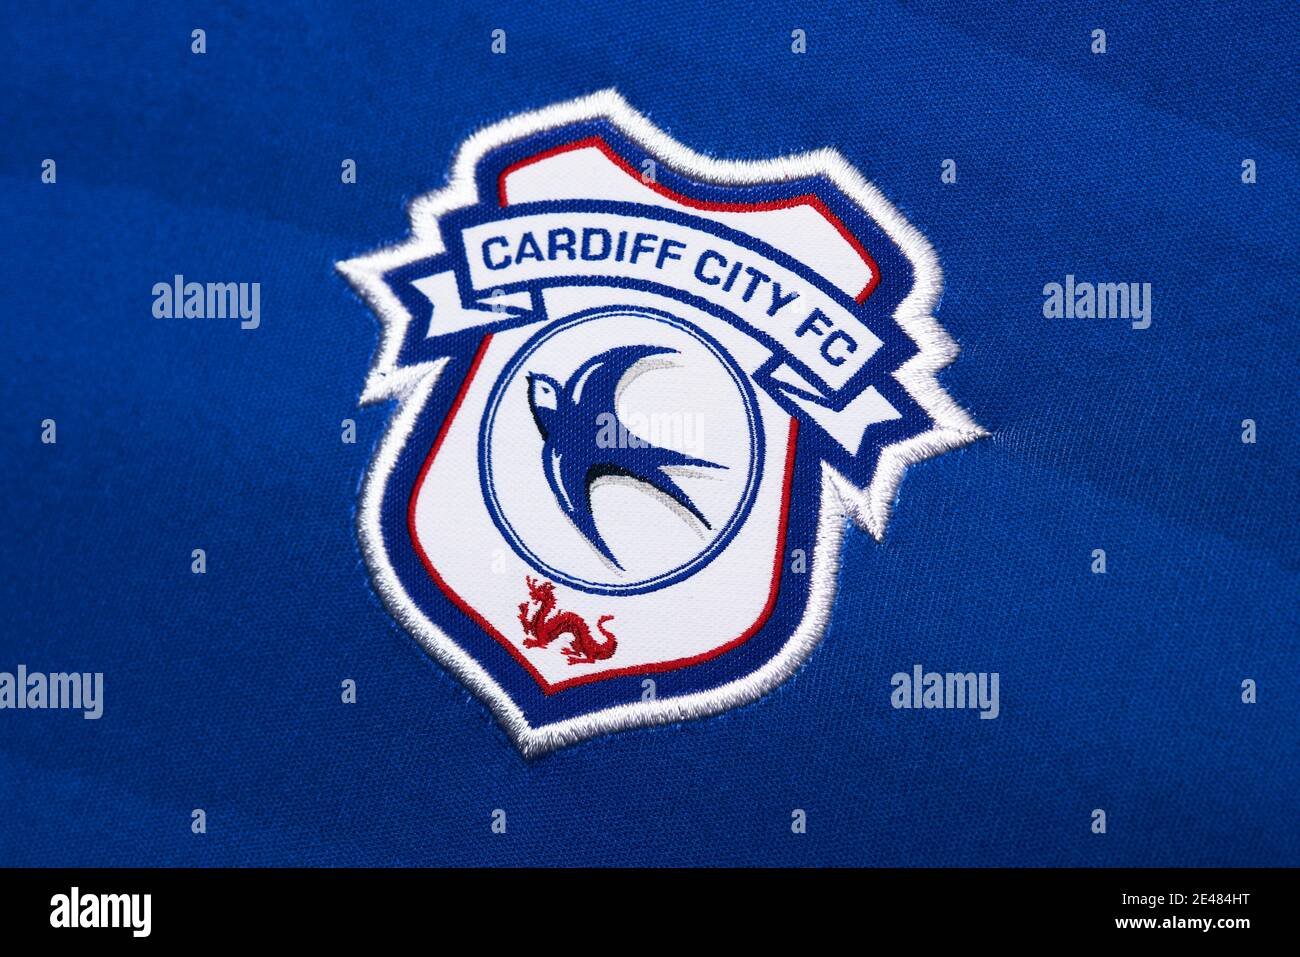 Download the Official Cardiff City FC App!